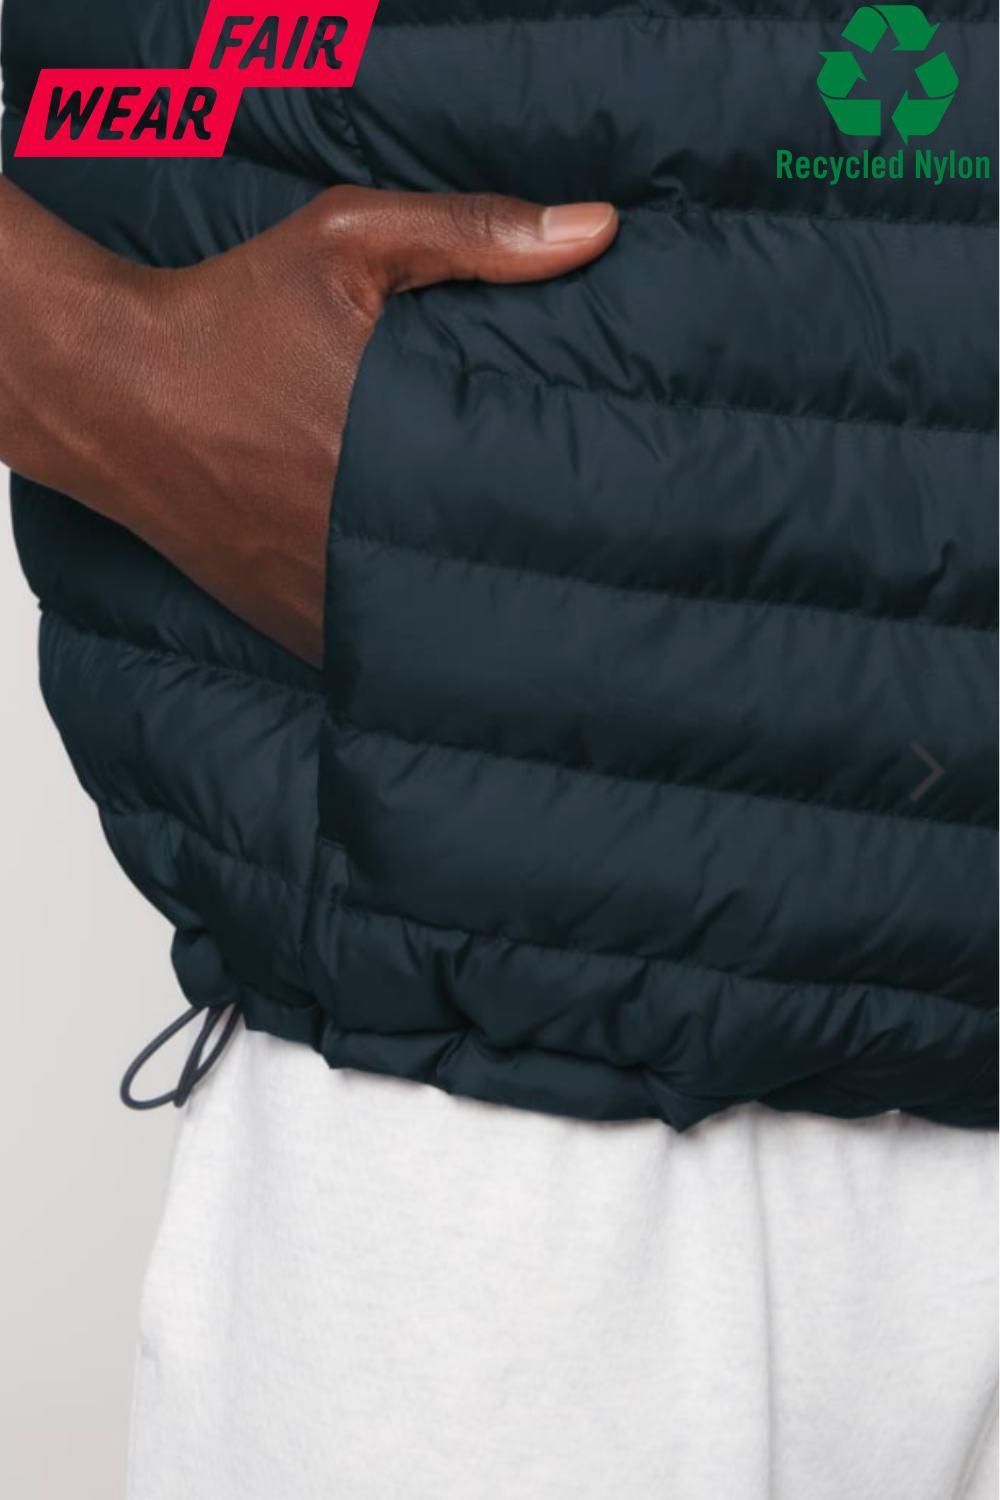 Mens Quilted Bodywarmer Gilet with WHITE embroidered logo - Accessories, New, Ready to Ship - Imperfect Pointes